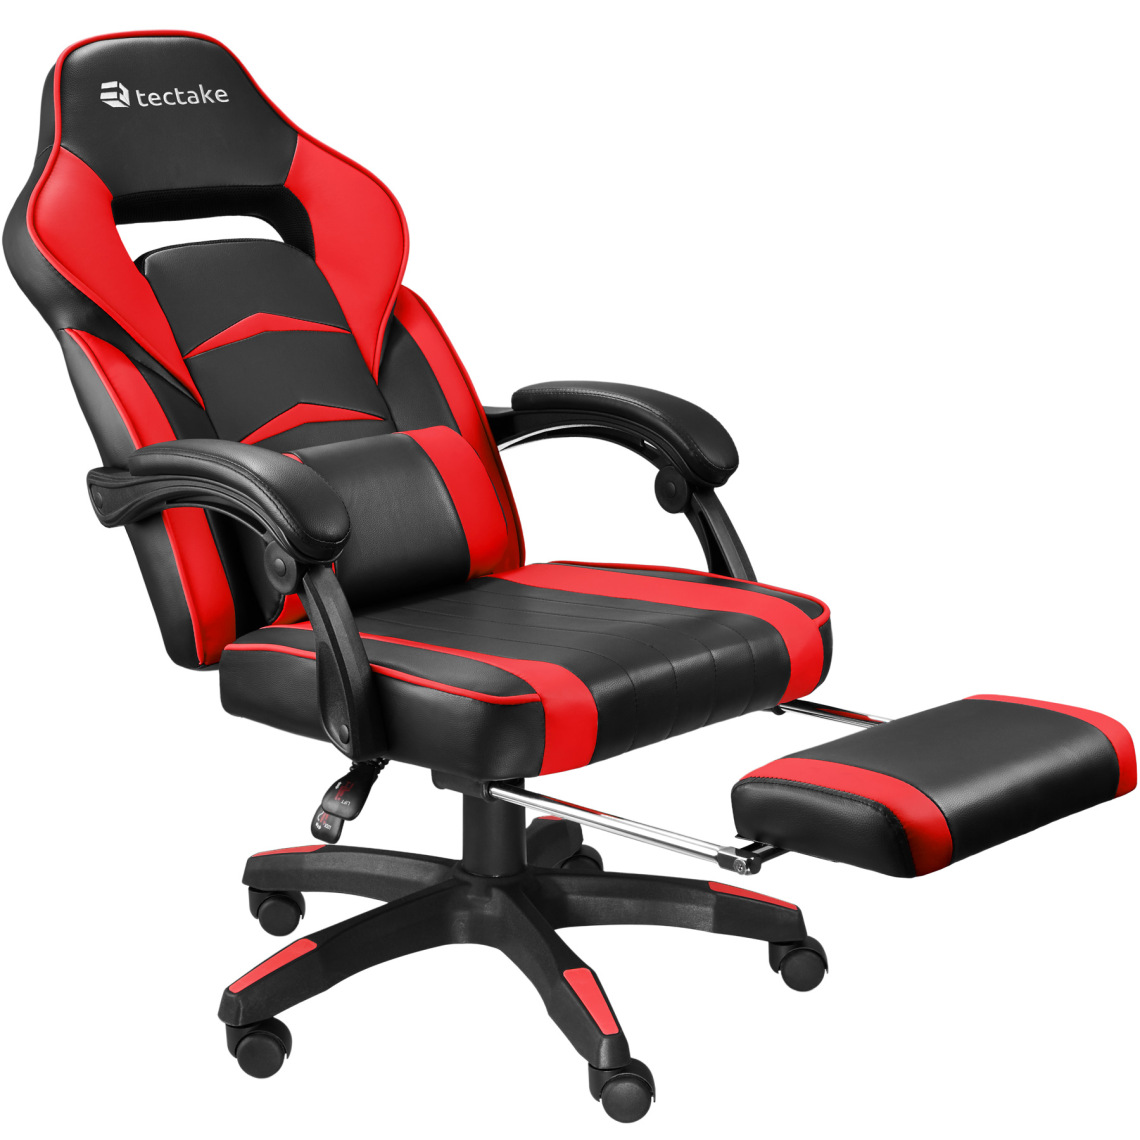 Tectake - Chaise gamer STORM - noir/rouge - Chaises